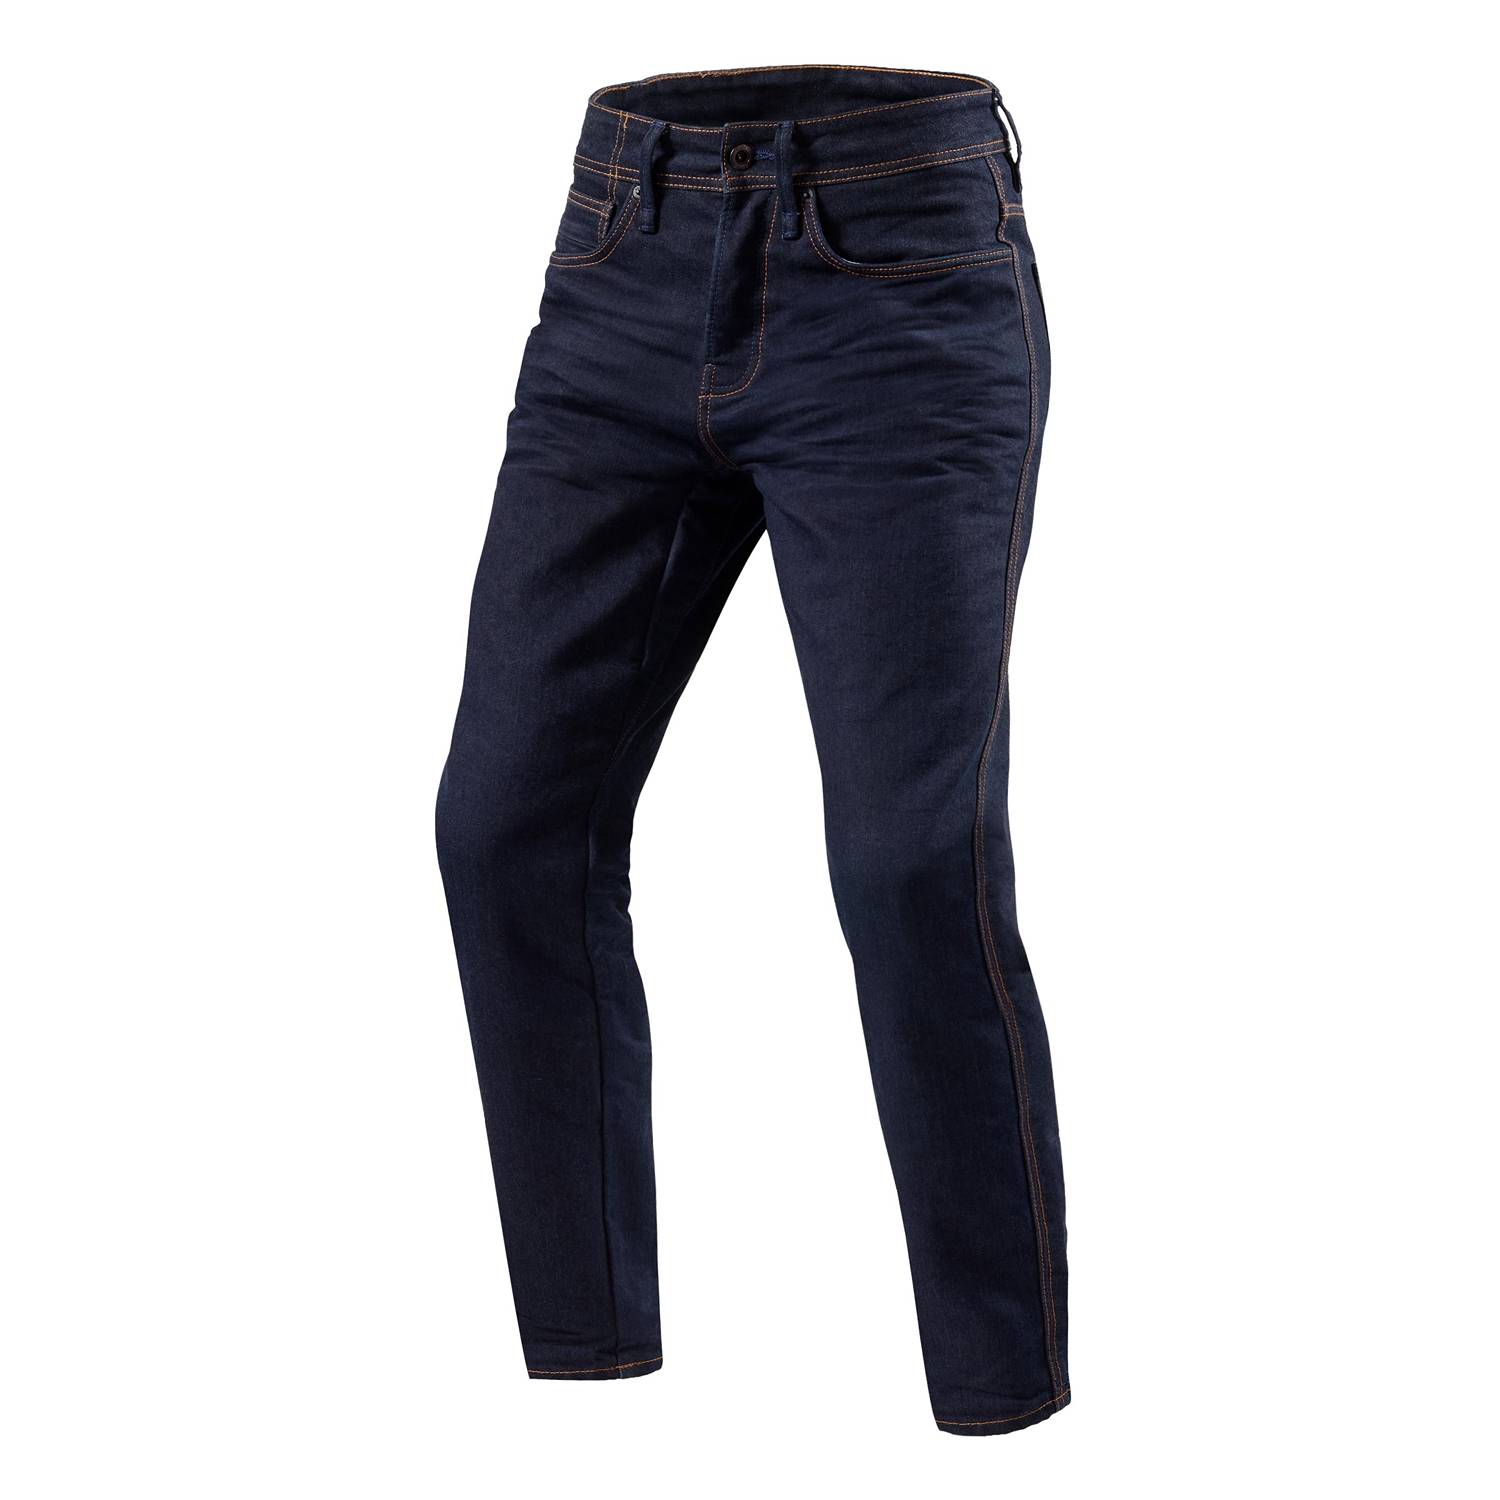 Image of REV'IT! Jeans Reed RF Dark Blue Used Motorcycle Jeans Size L32/W31 ID 8700001336987